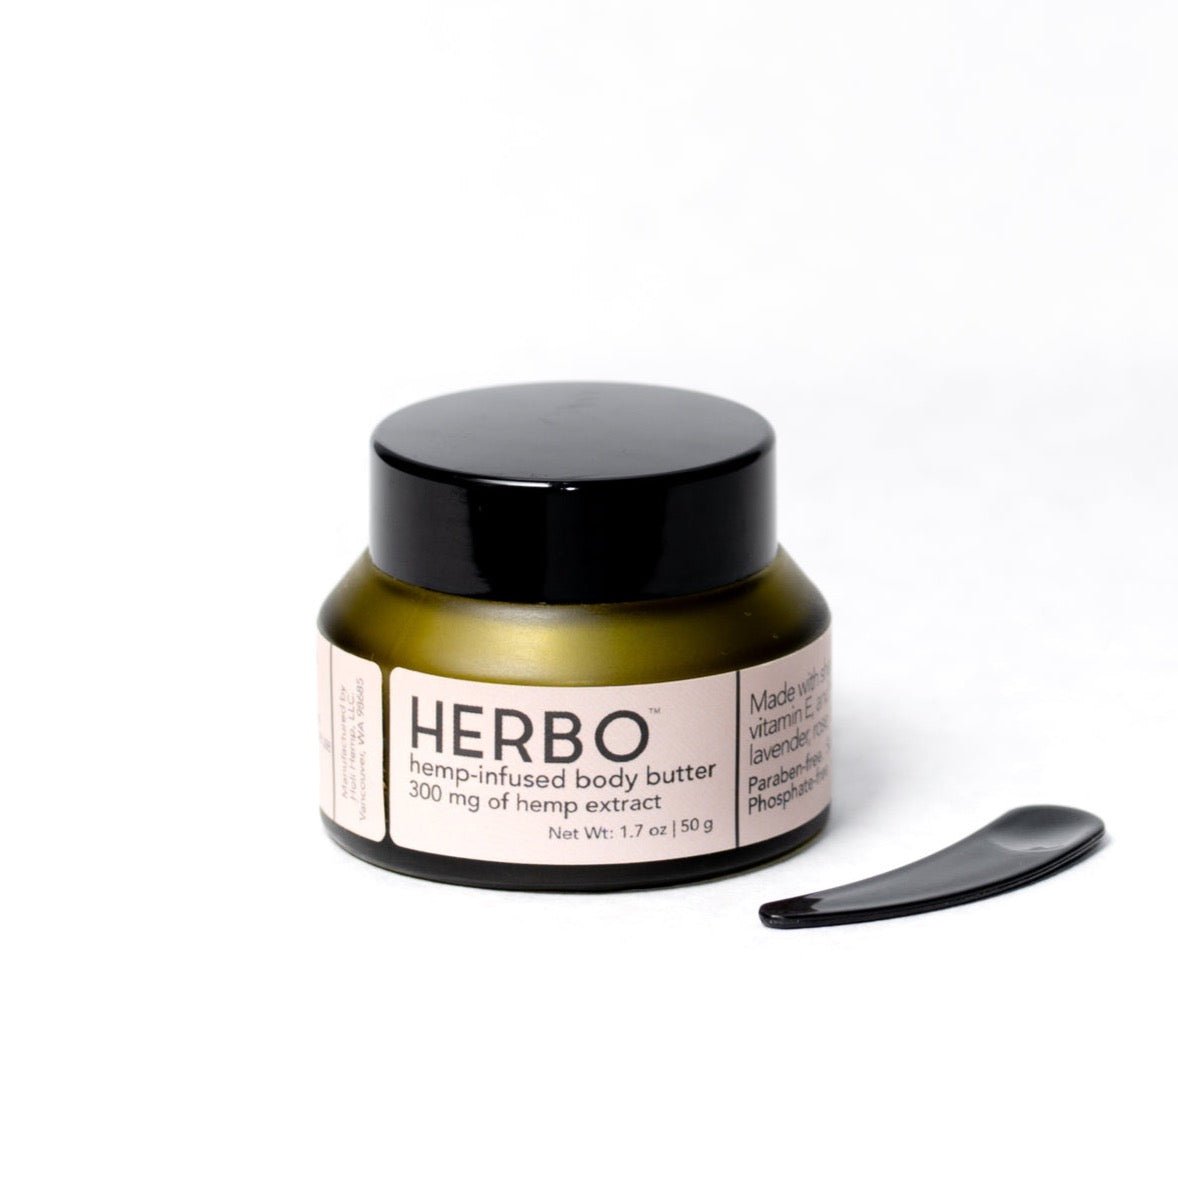 An olive green jar filled with hemp infused body butter. The Herbo Botanical Body Butter is developed by HERBO in Portland, OR.